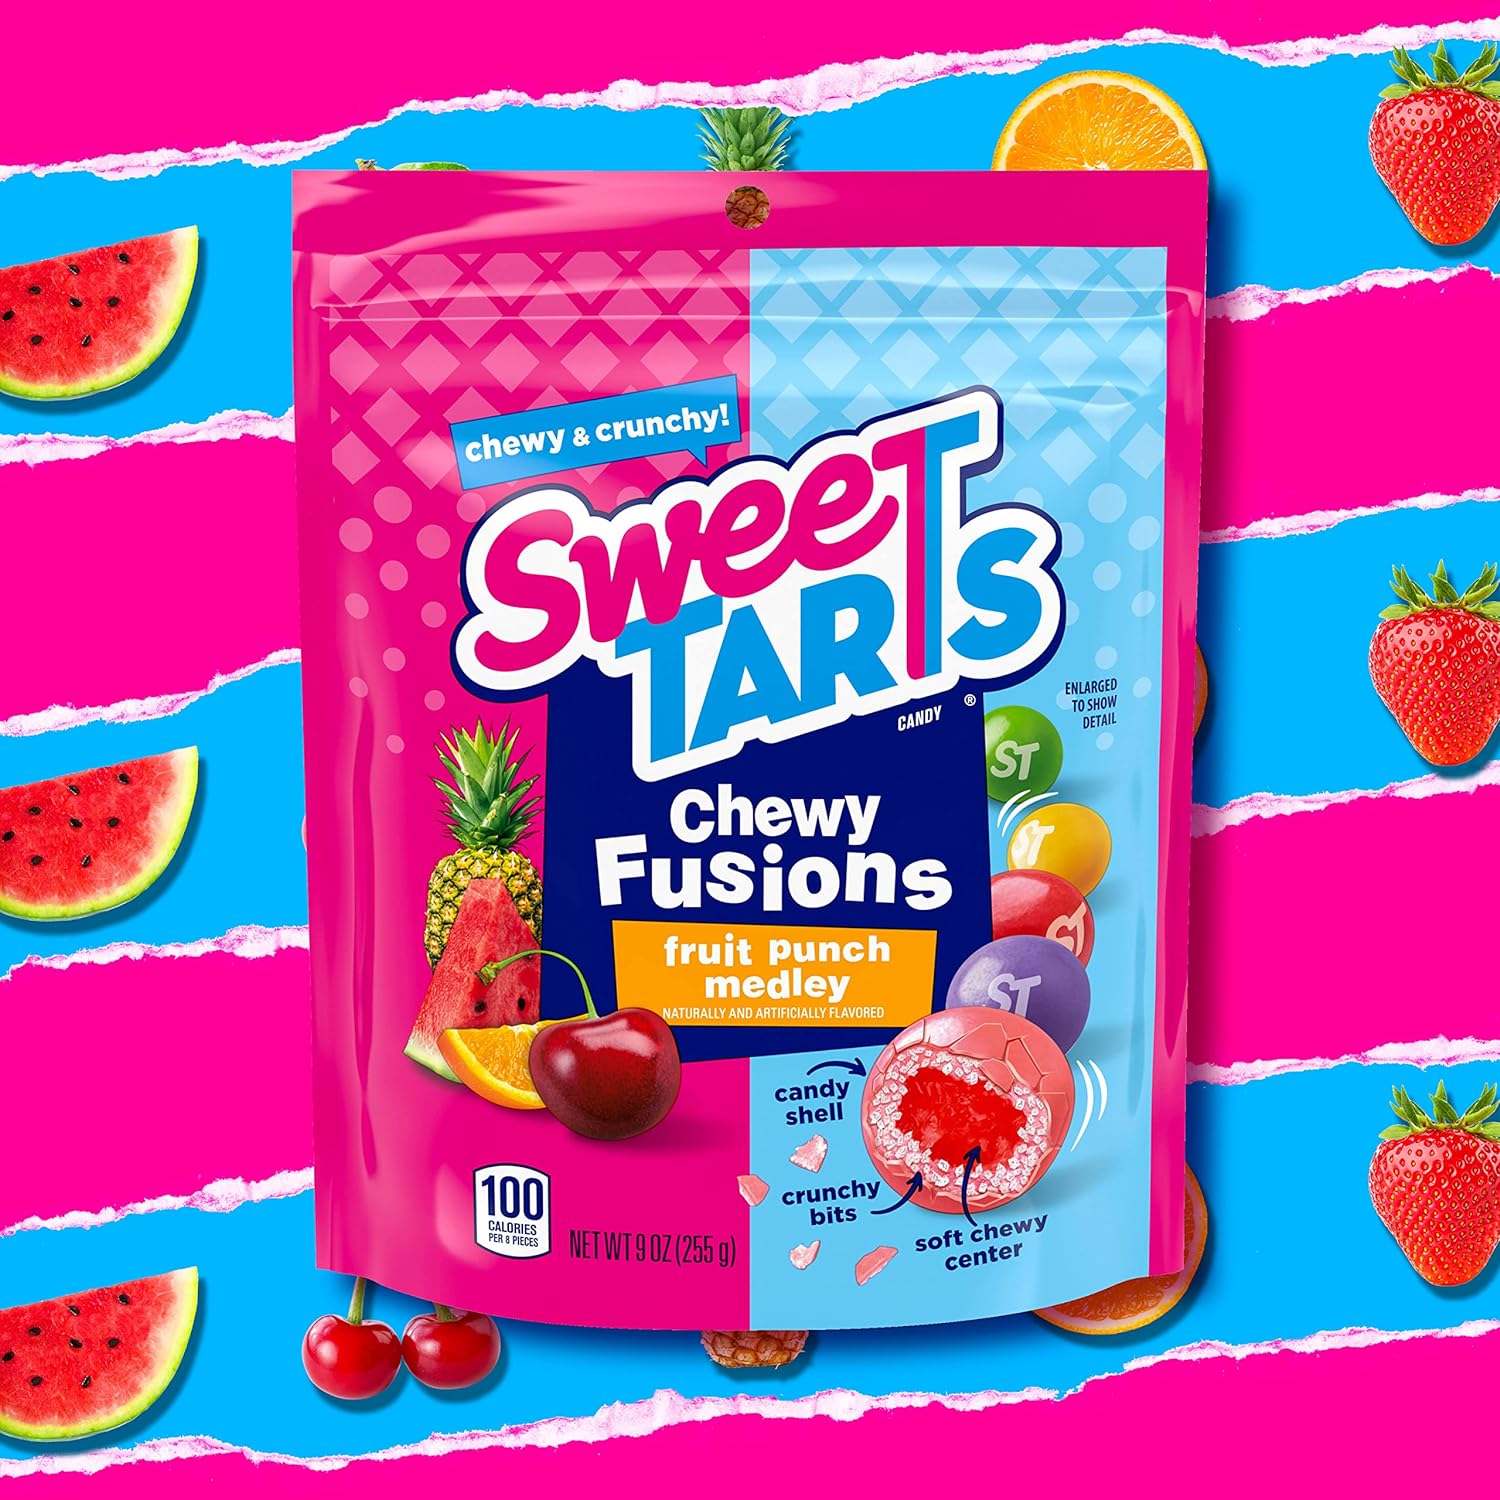 SweeTARTS Chewy Fusions Candy, Fruit Punch Medley, 9 ounce